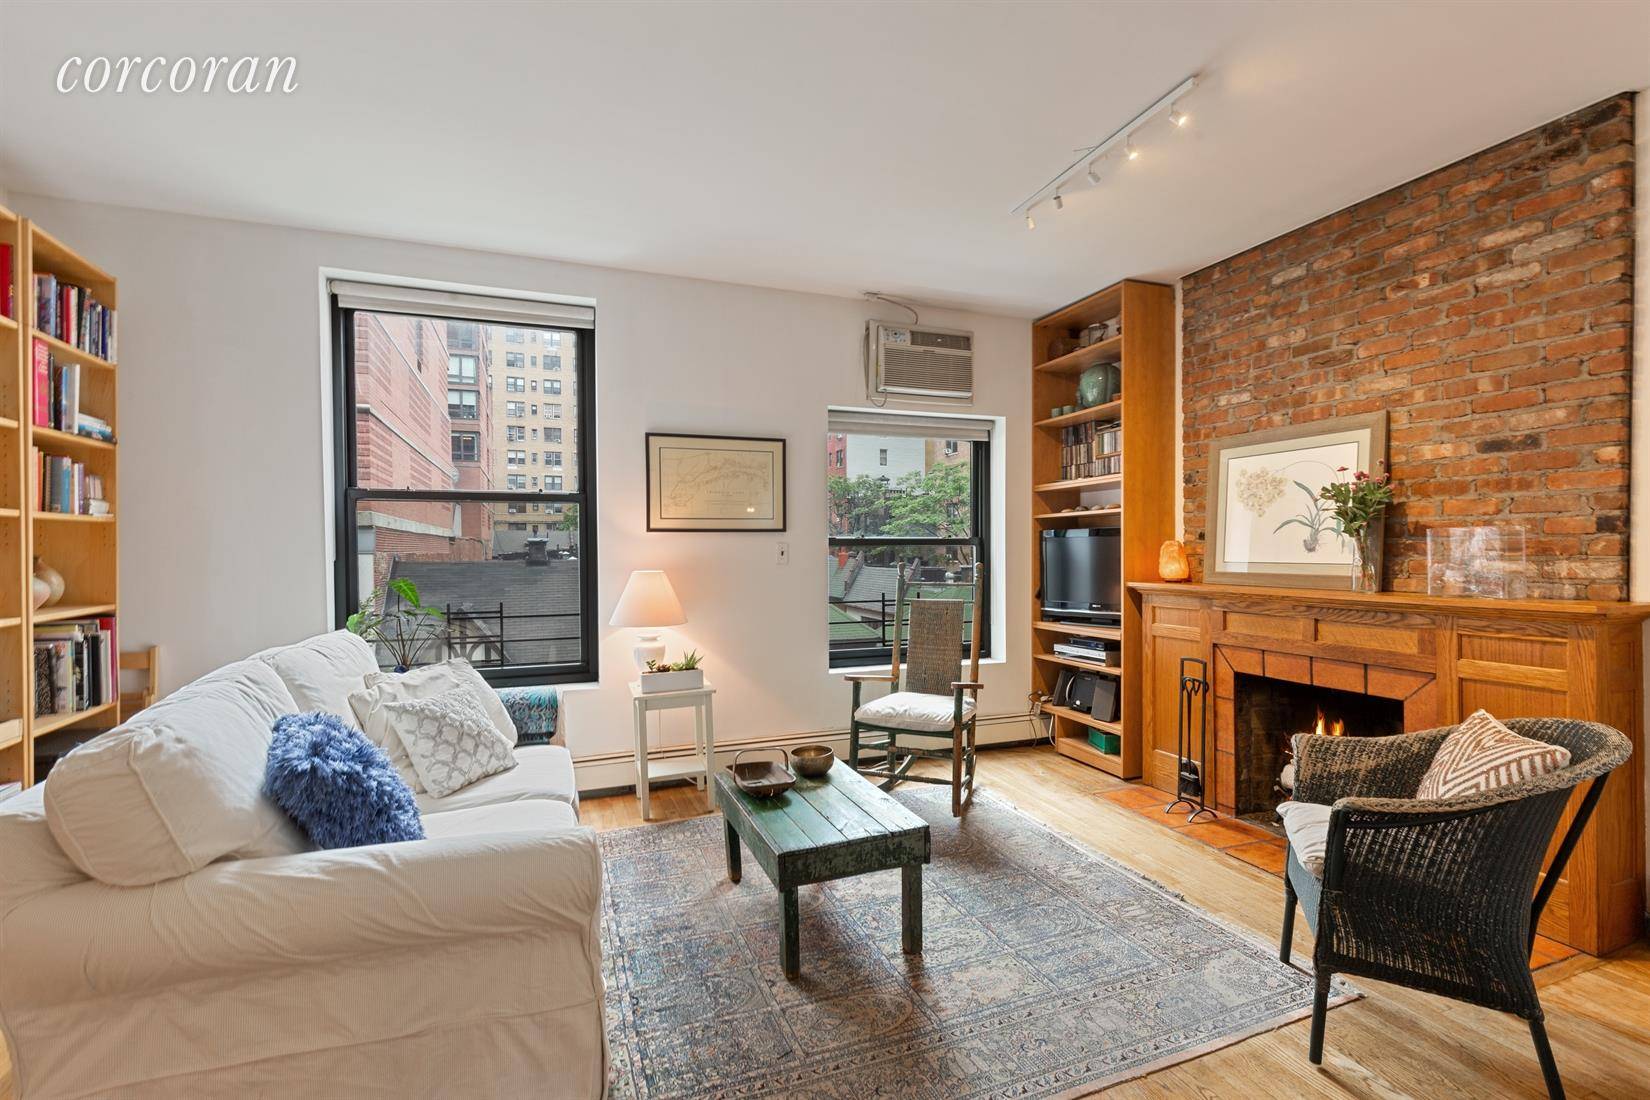 Move right into this beautiful amp ; sunny Upper West Side true two bedroom two bath home.